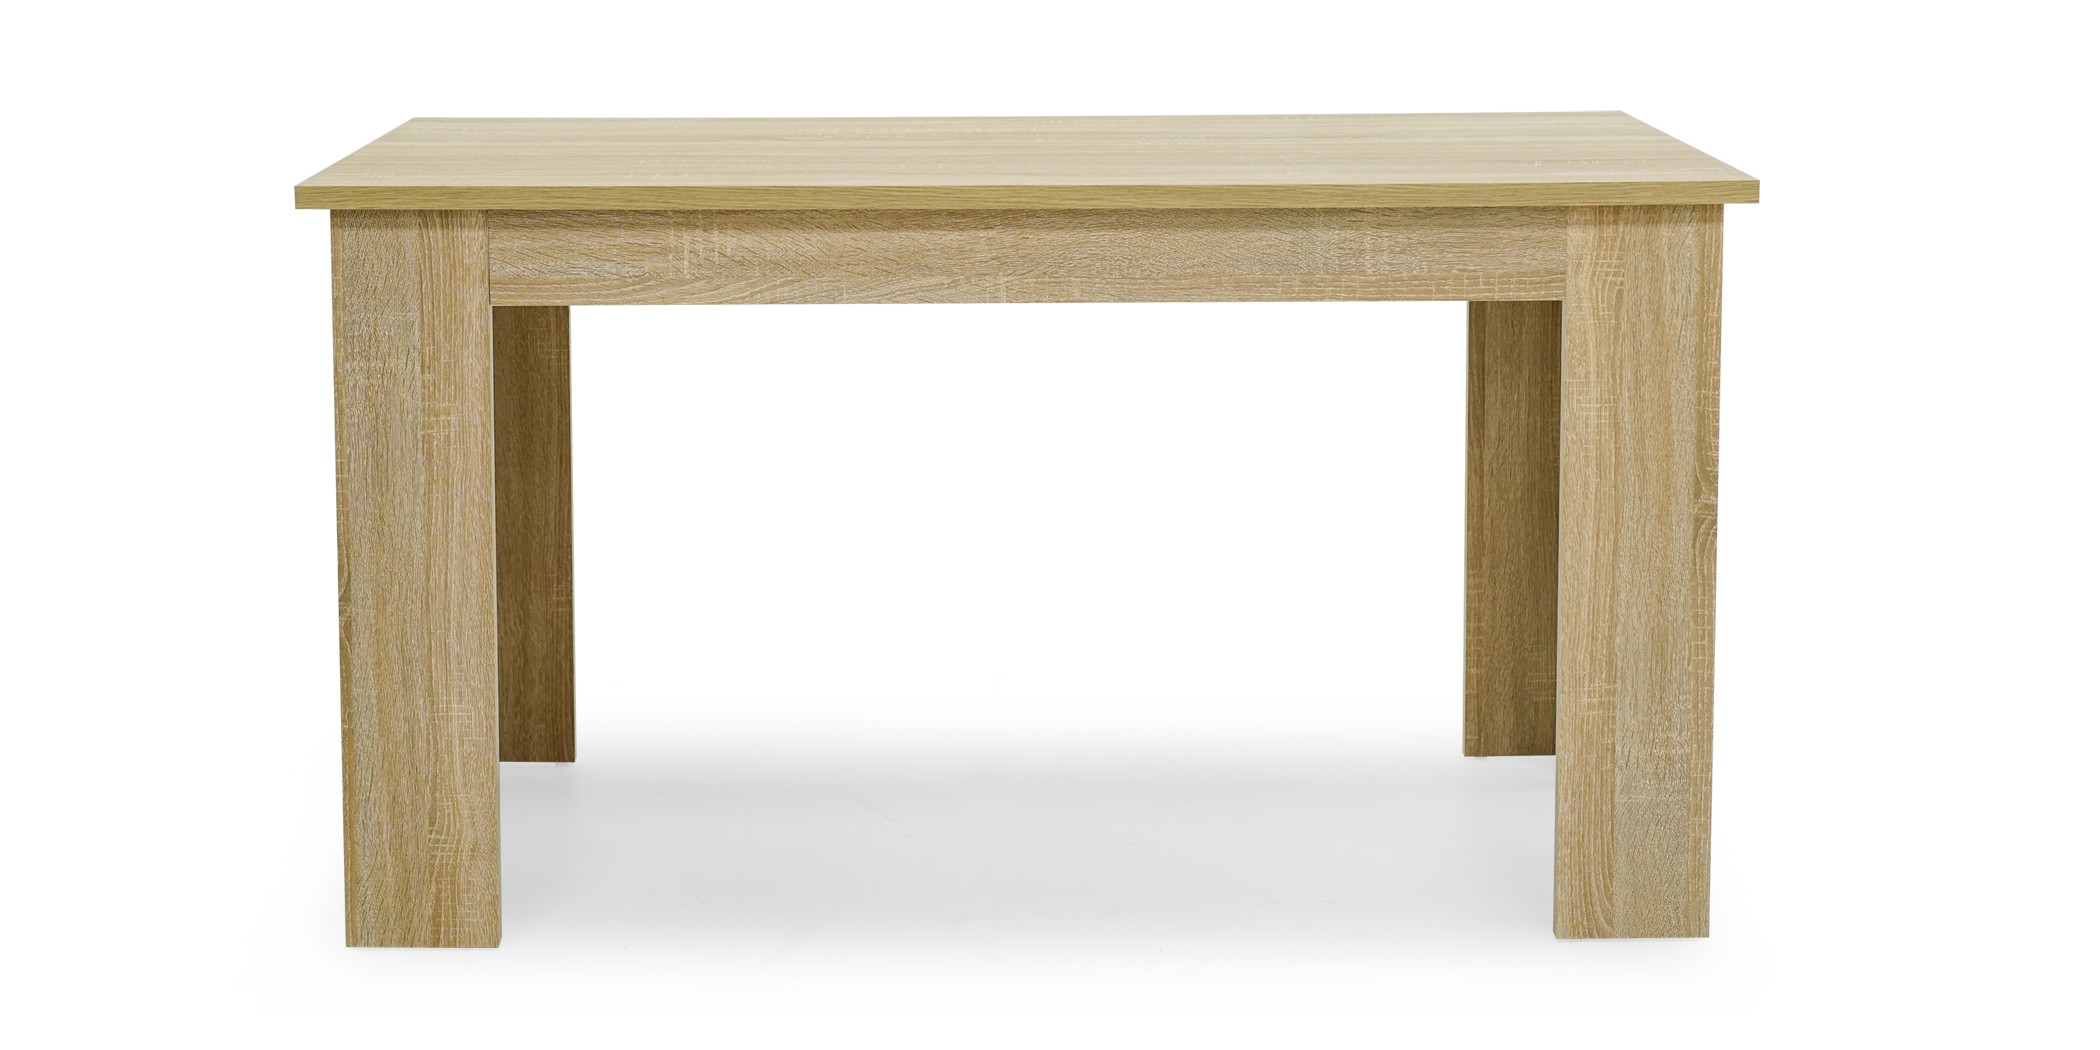 Munchen Table and 2 Benches Sonoma Oak Color